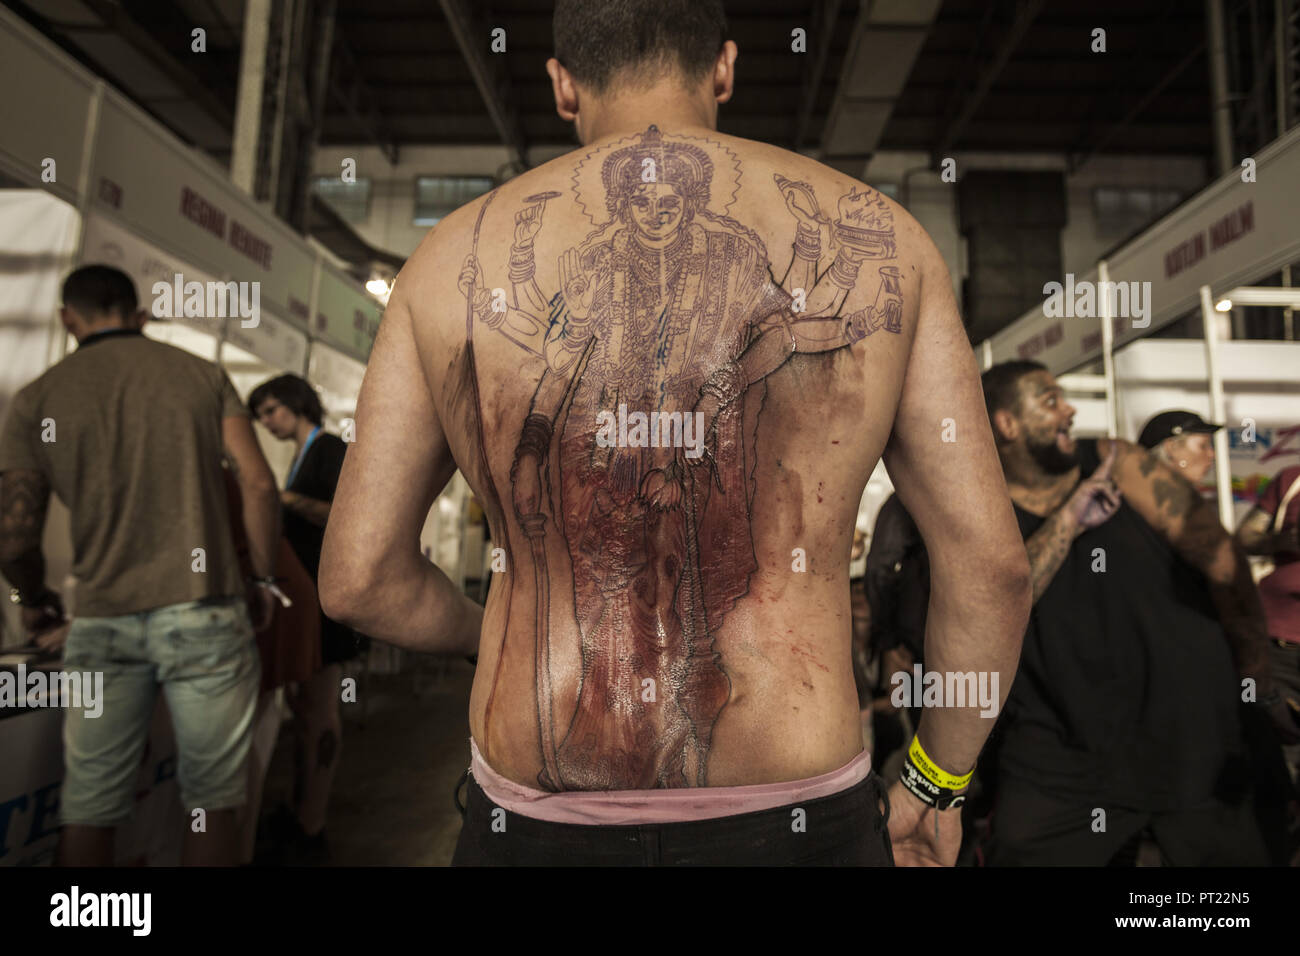 Barcelona, Catalonia, Spain. 5th Oct, 2018. Man shows his back during the process of tattooing in the 21st tattoo and urban culture Expo in Barcelona. Credit: Celestino Arce Lavin/ZUMA Wire/Alamy Live News Stock Photo